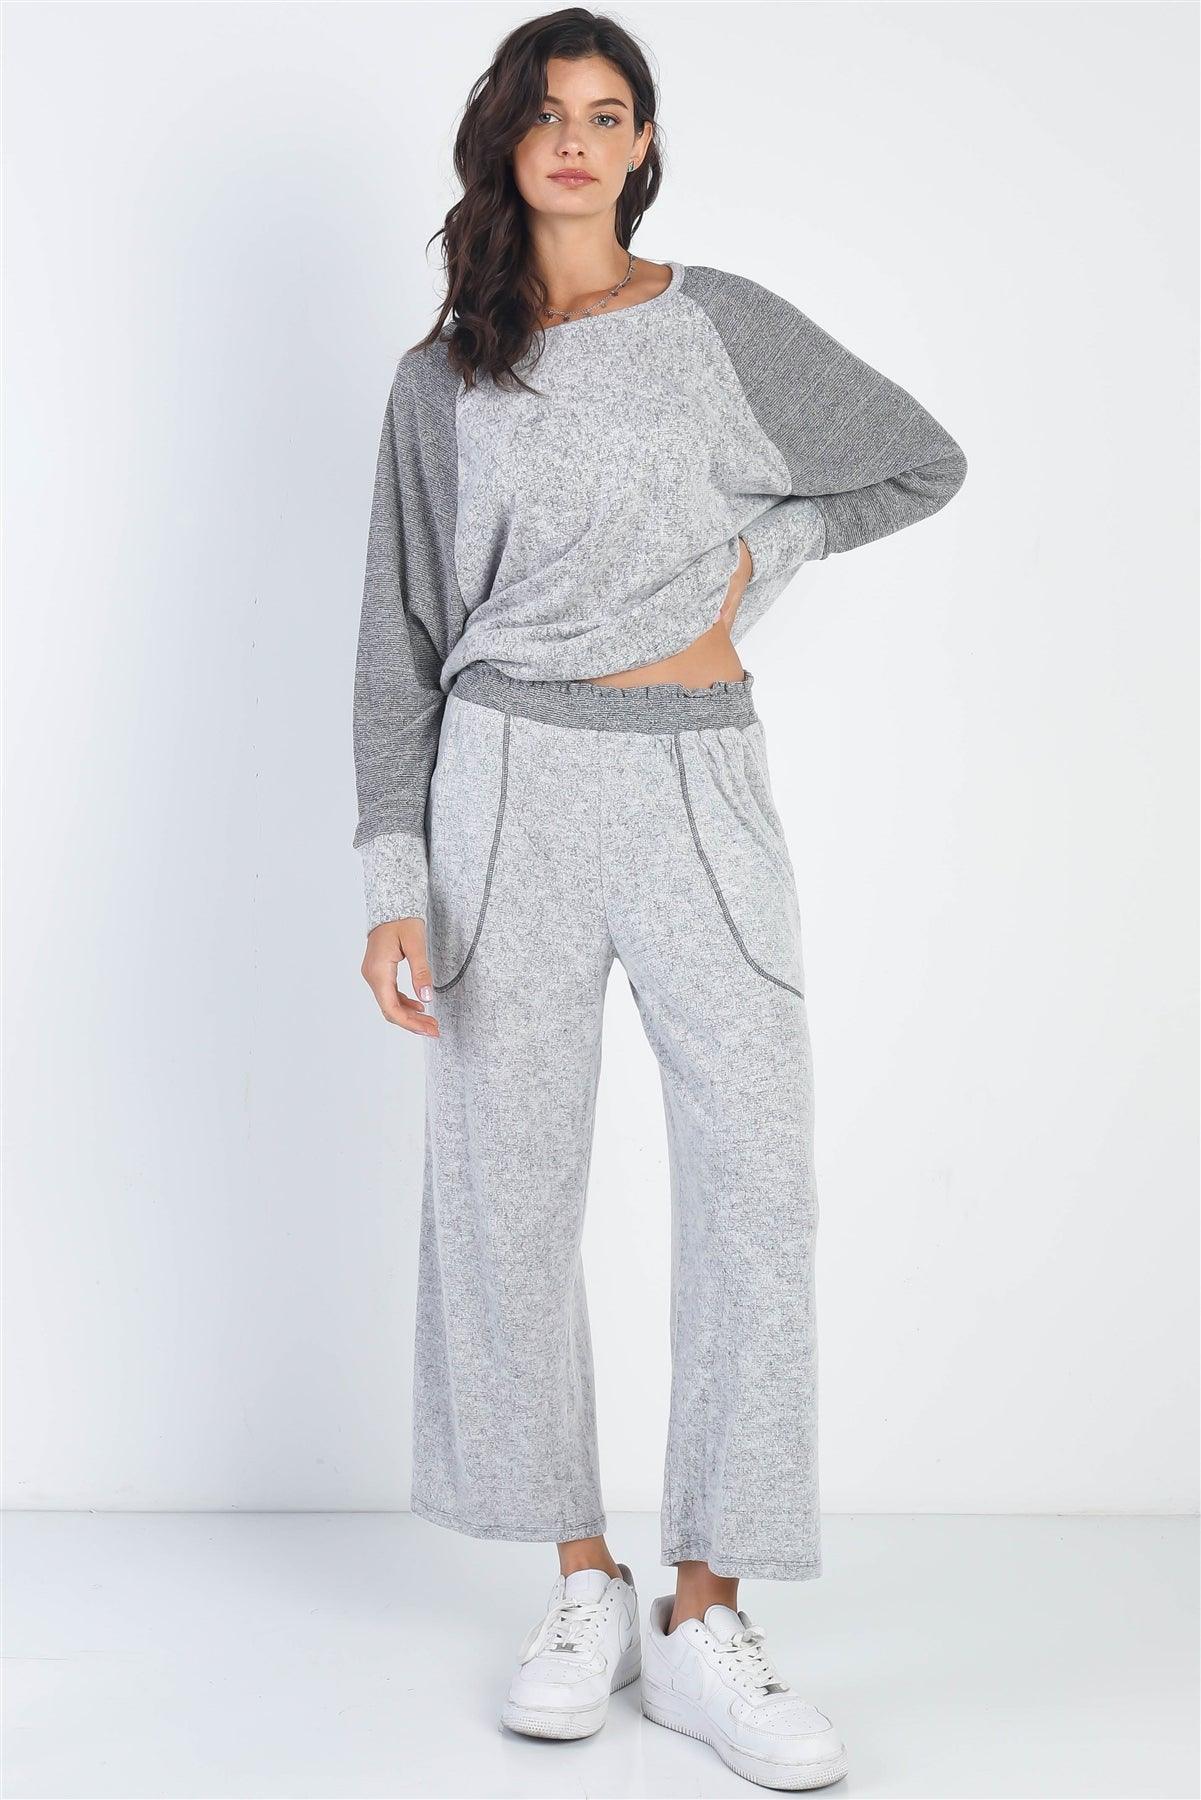 Heather Grey Round Neck Long Sleeve Top & Relax Fit Pants Set /1-1-1